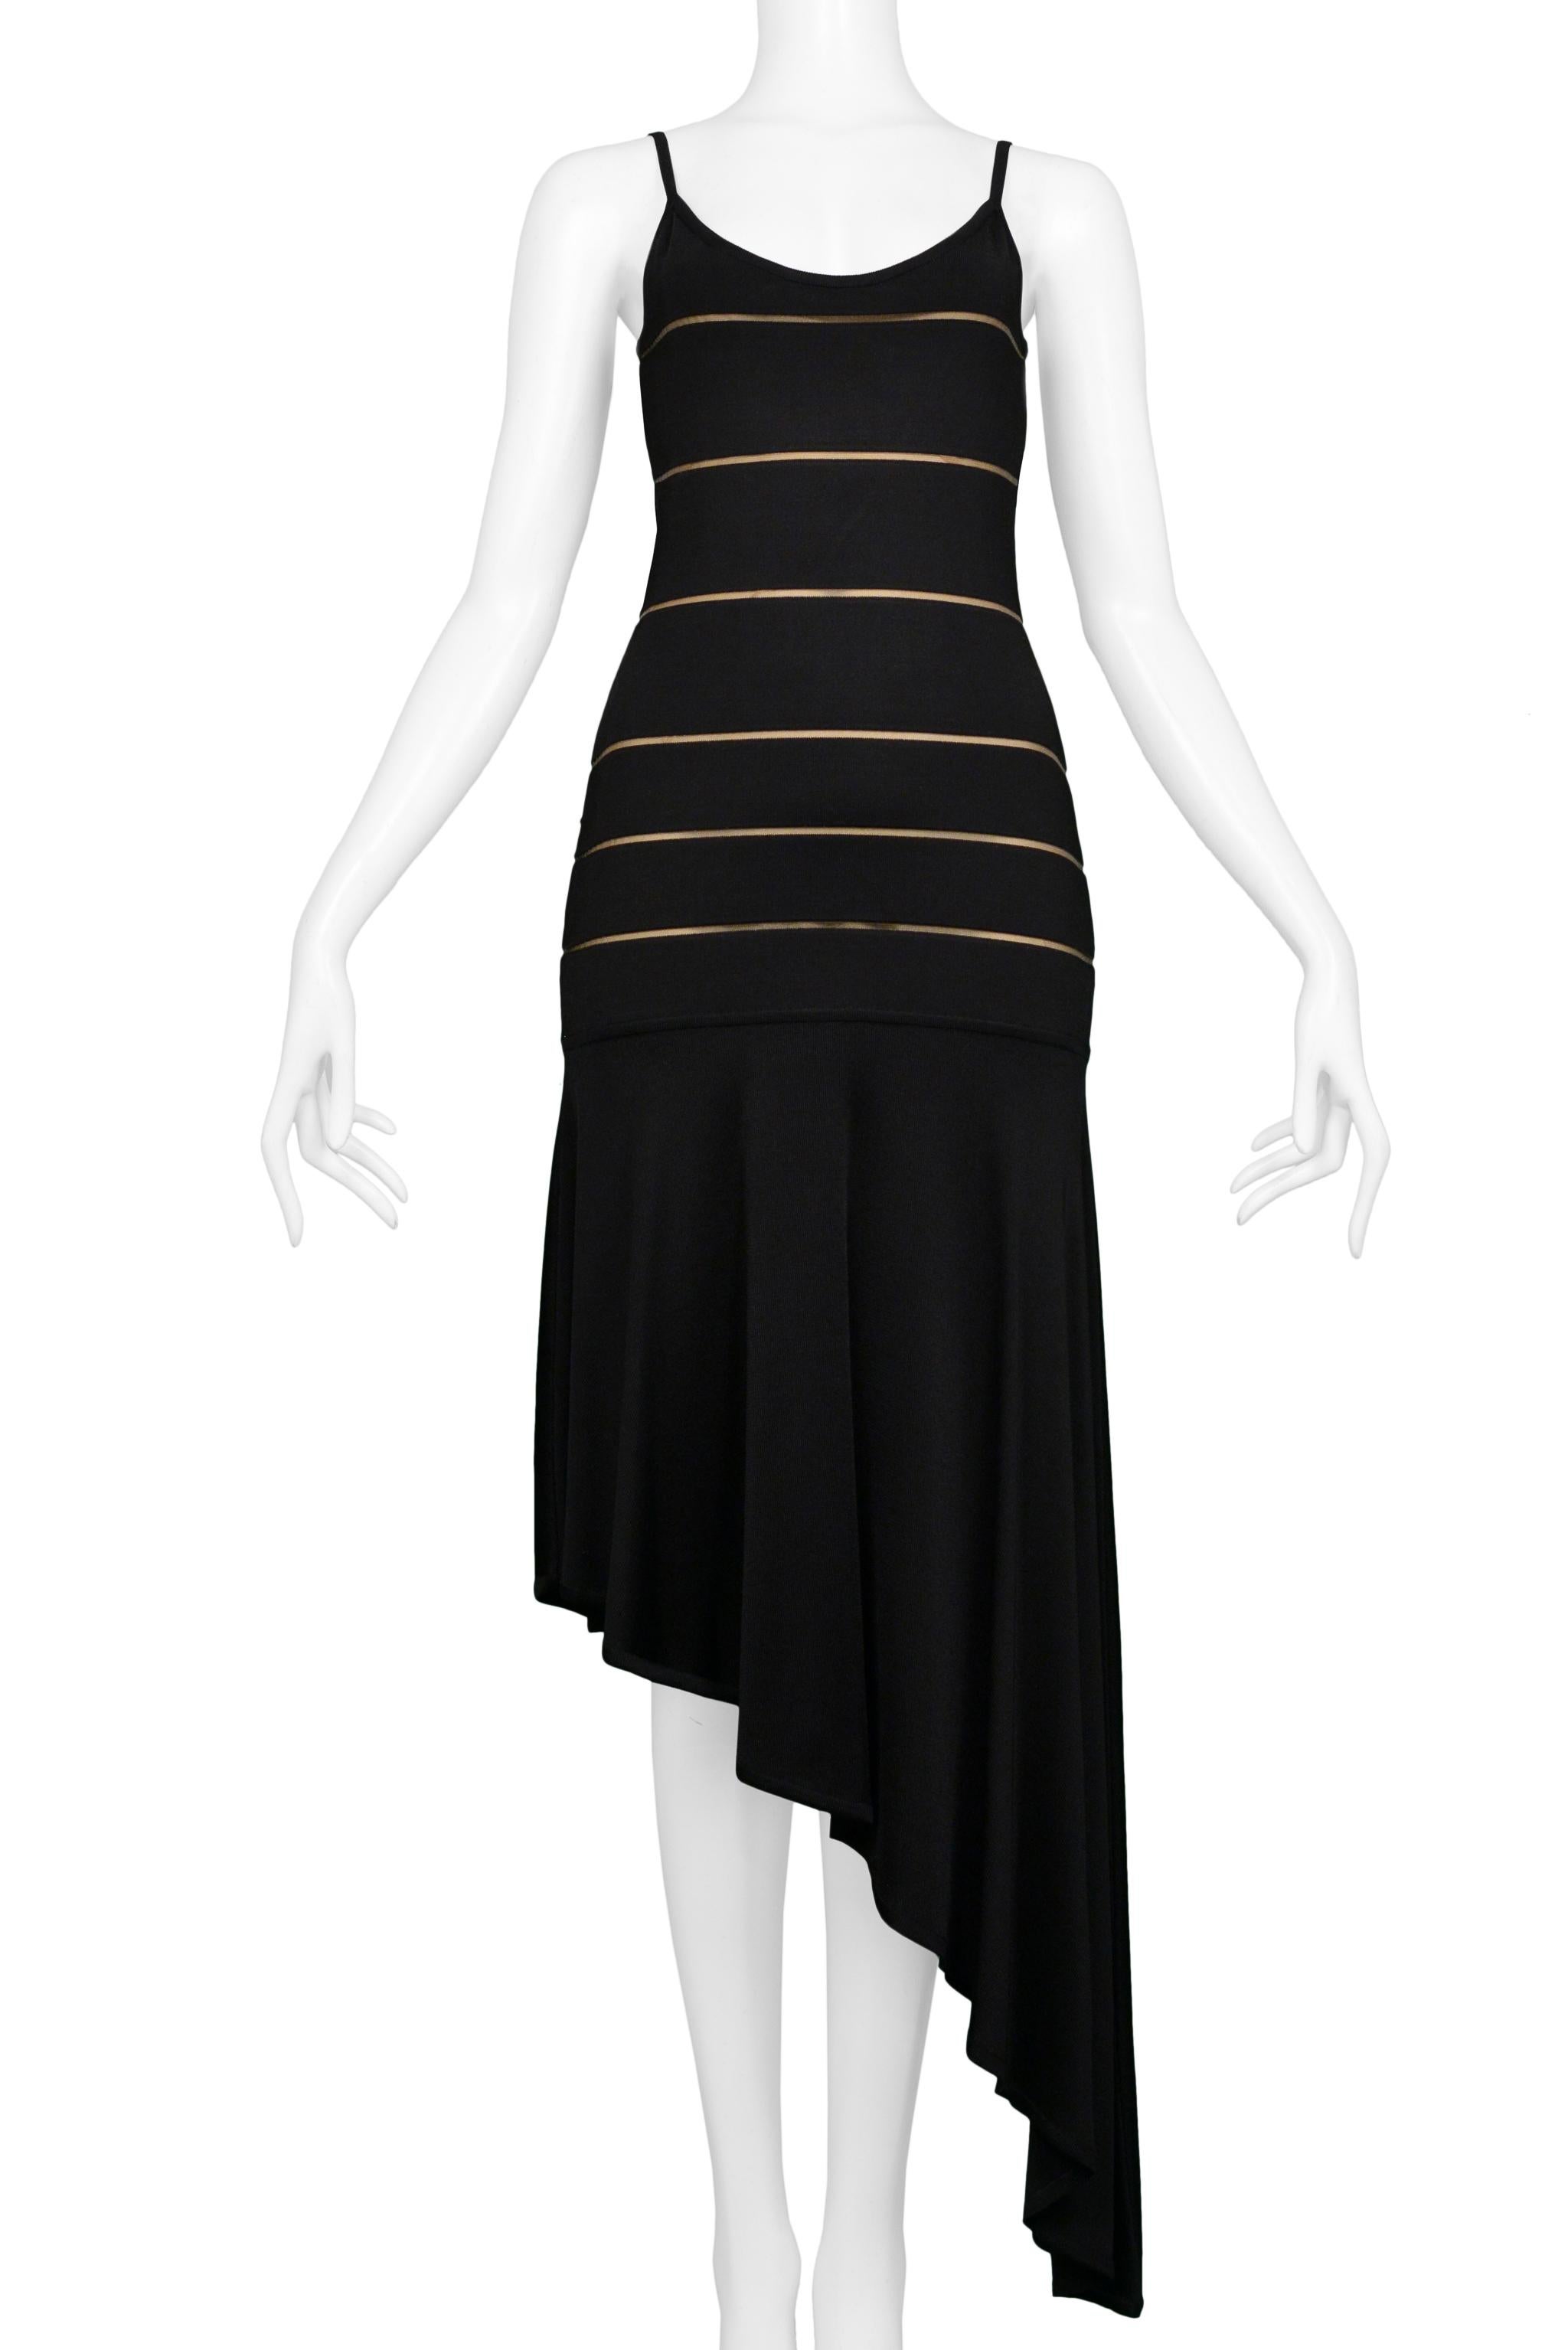 Resurrection Vintage is excited to offer a vintage Herve Leger black dress featuring an asymmetrical hem line, striped body, and spaghetti straps.

Herve Leger
Size X-Small
Rayon, Elastane, & Nylon
Circa 1990s
Excelent Vintage Condition
Authenticity